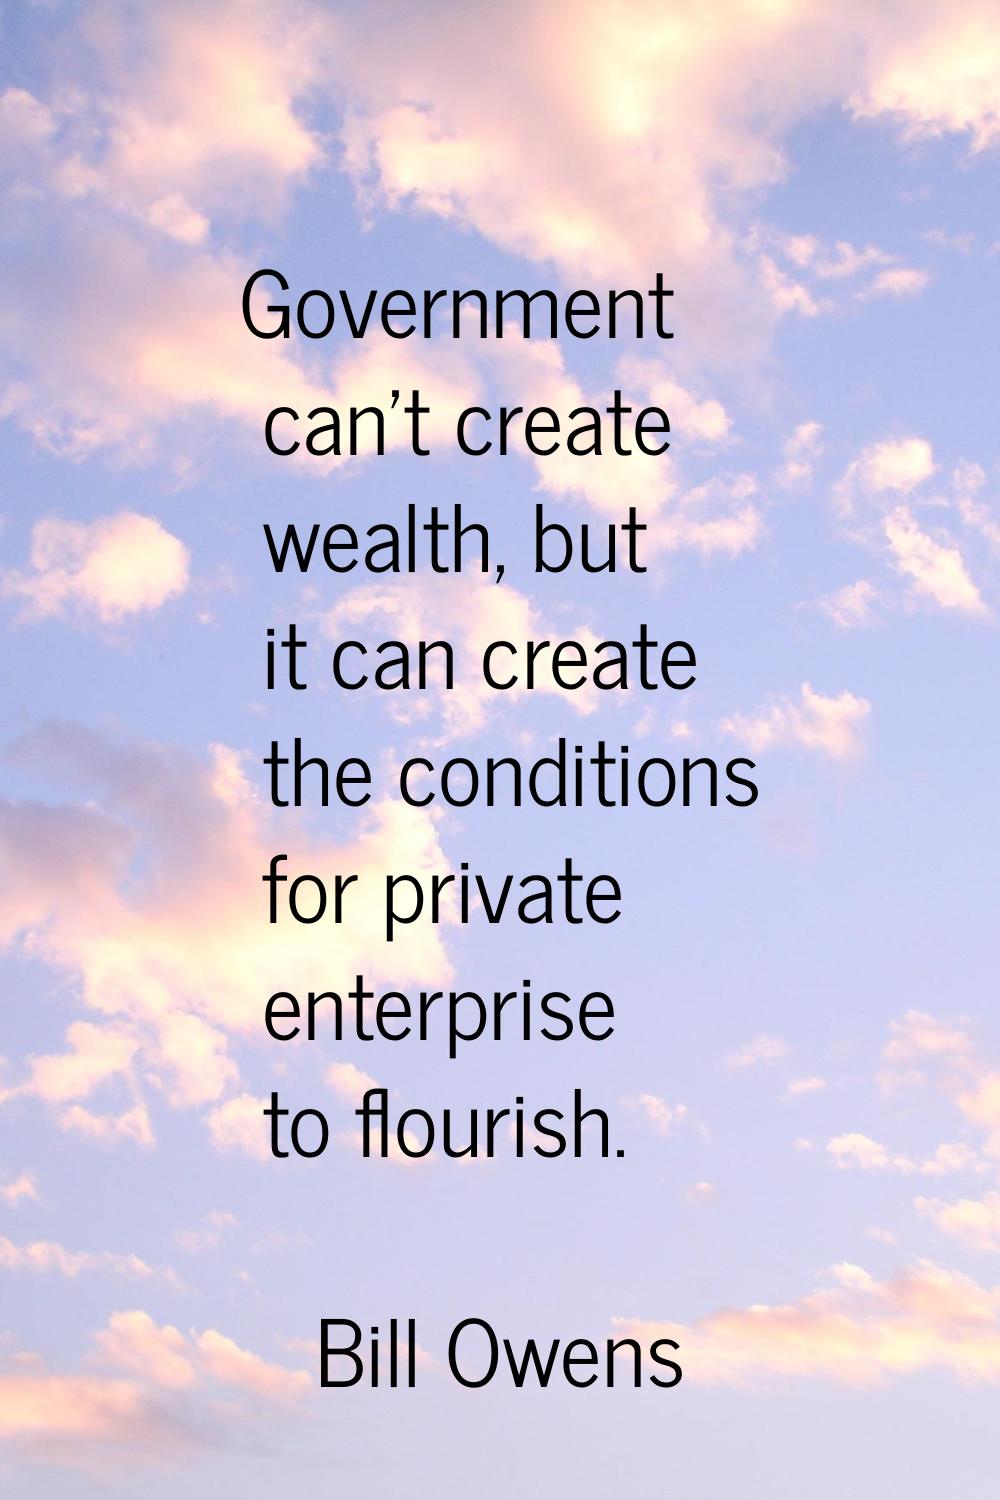 Government can't create wealth, but it can create the conditions for private enterprise to flourish